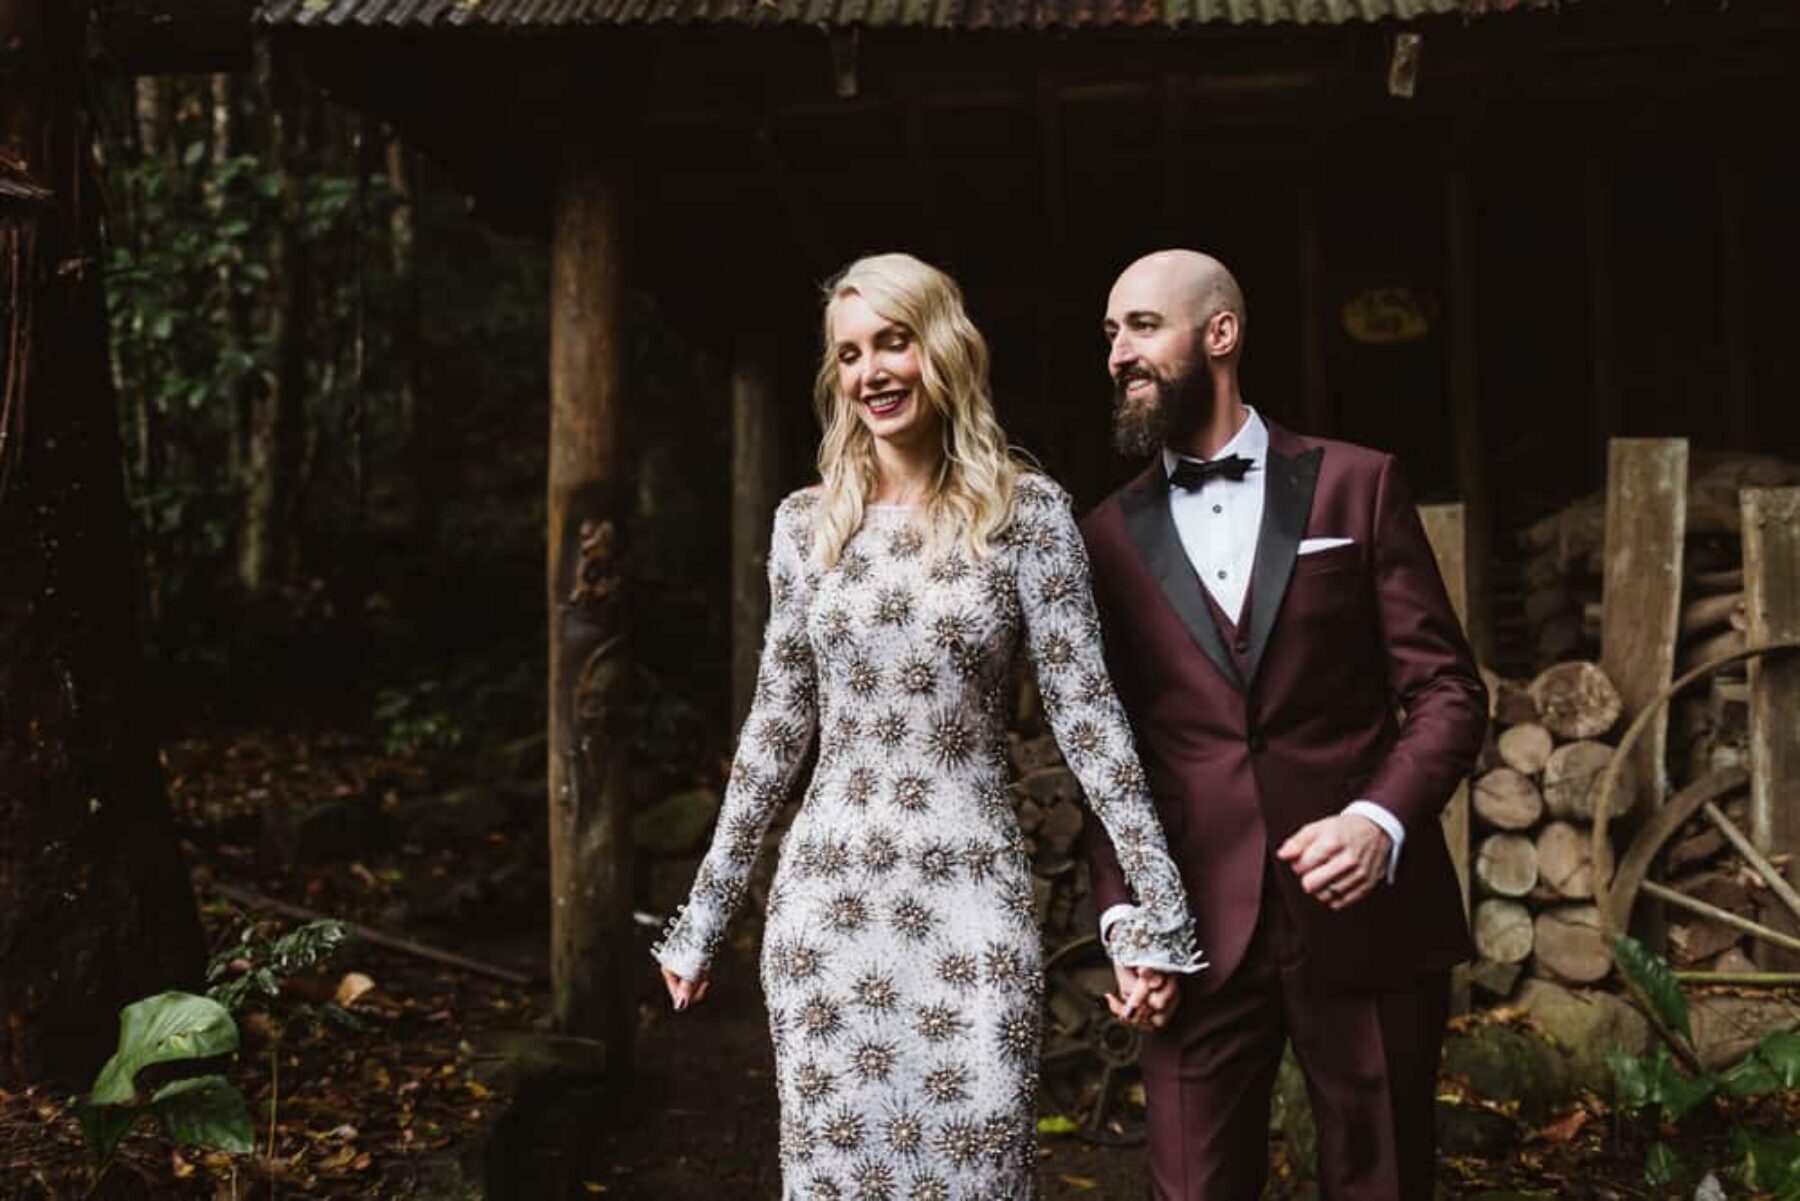 stylish alternative bride and groom - photography by Janneke Storm